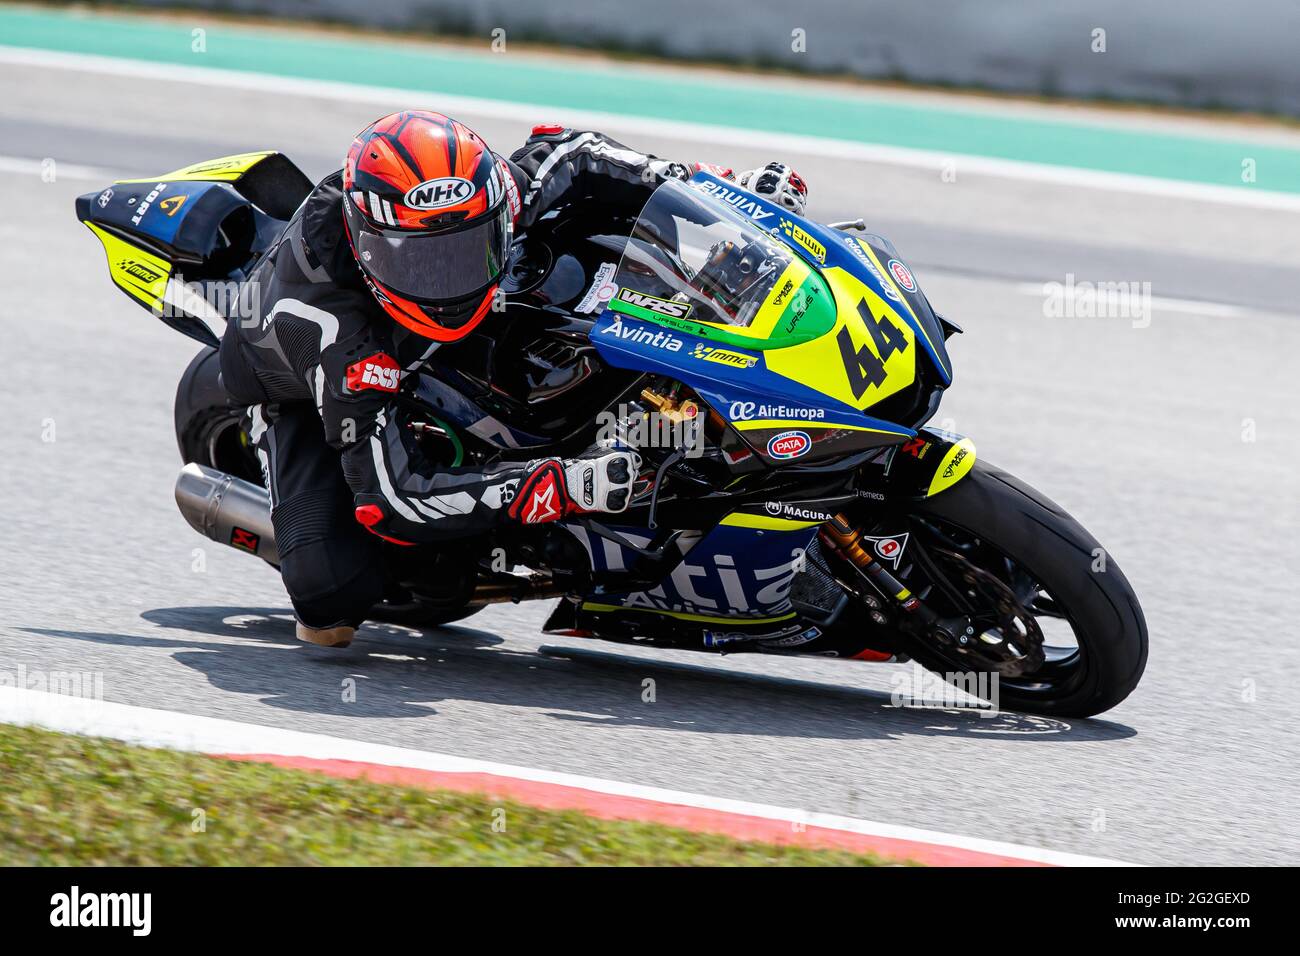 Montmelo, Barcelona, Spain. 11th June, 2021. Kevin Orgis from Germany,  rider of Avintia Esponsorama Junior Team with Yamaha during the Official  Testing Session Moto 2 of FIM CEV Repsol Barcelona in Circuit